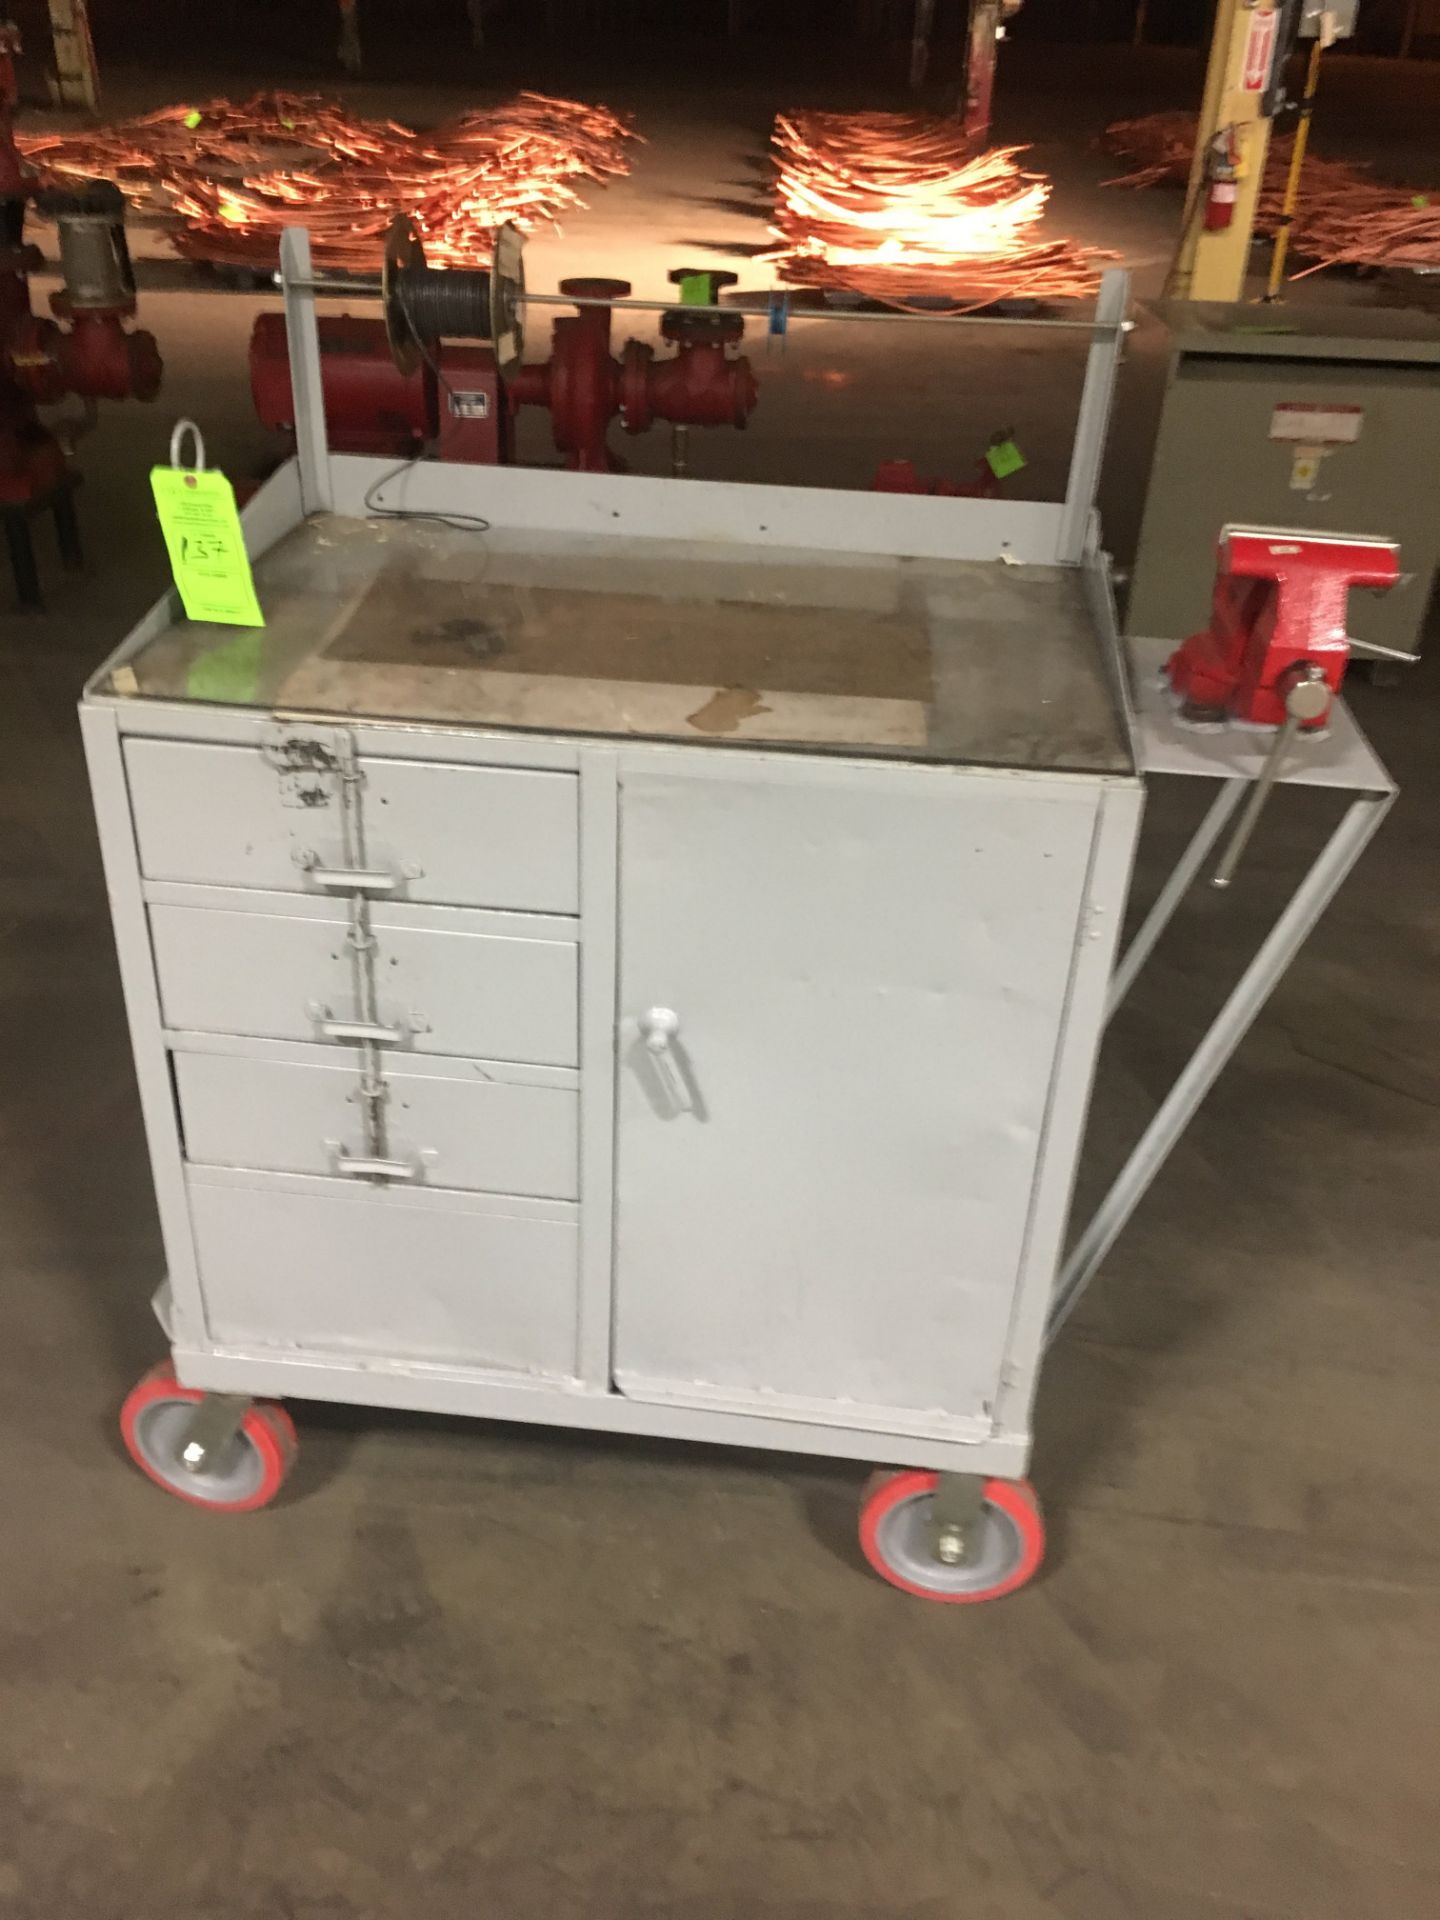 4-WHEEL PORTABLE STEEL TOOL BOX W/VISE(LOCATED AT 2000 TAYLOR STREET, FORT WAYNE IN 46802)